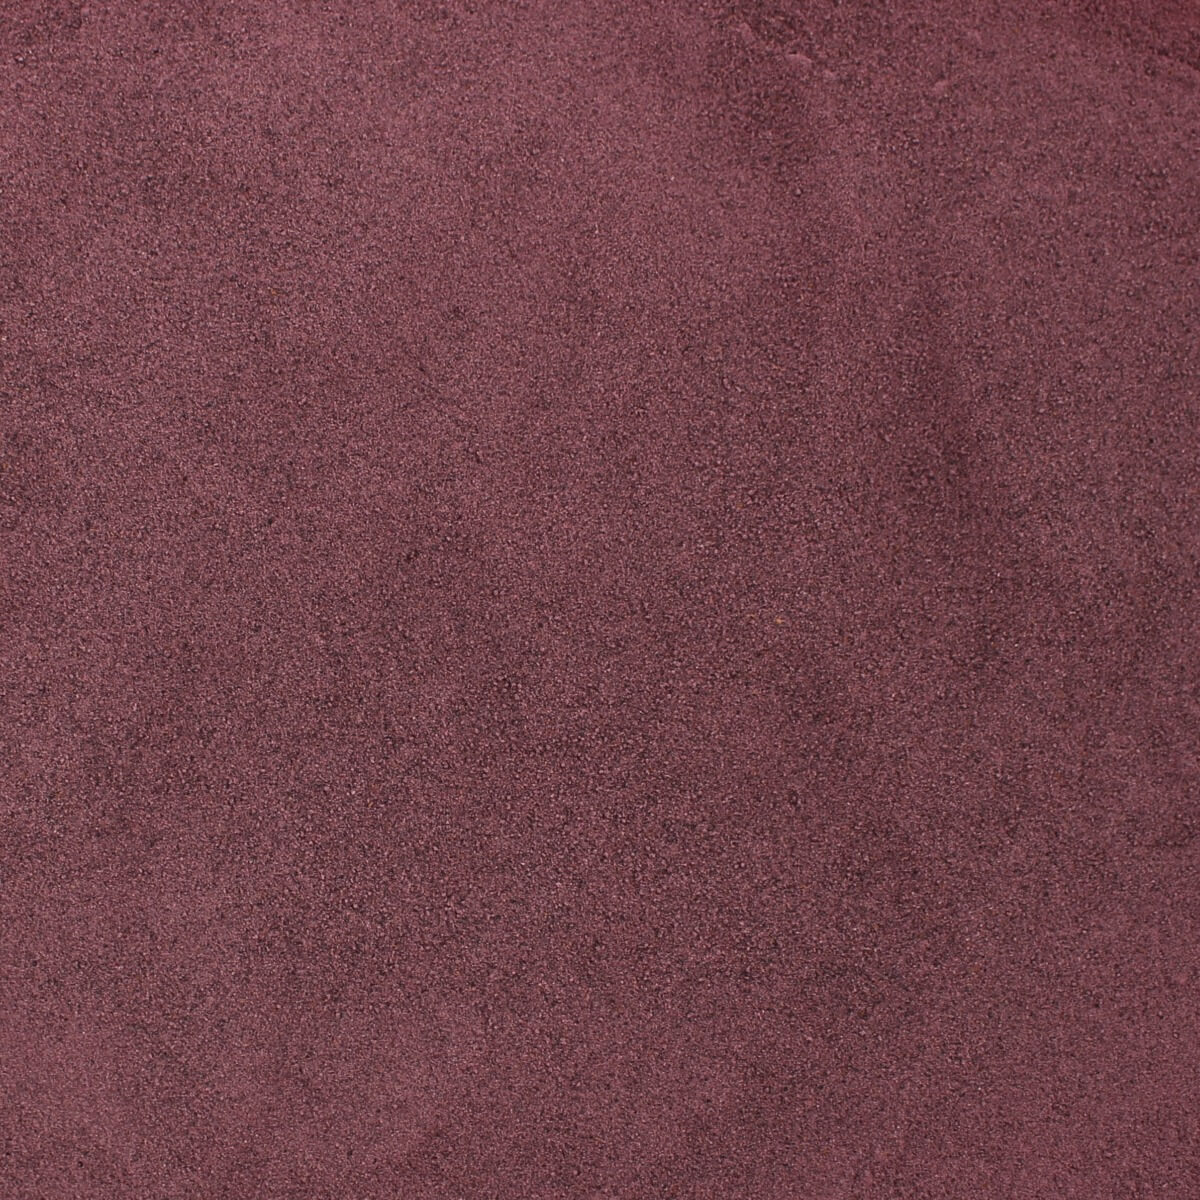 A close up image of a burgundy colored background featuring Harmony House Freeze Dried Blueberry Powder.